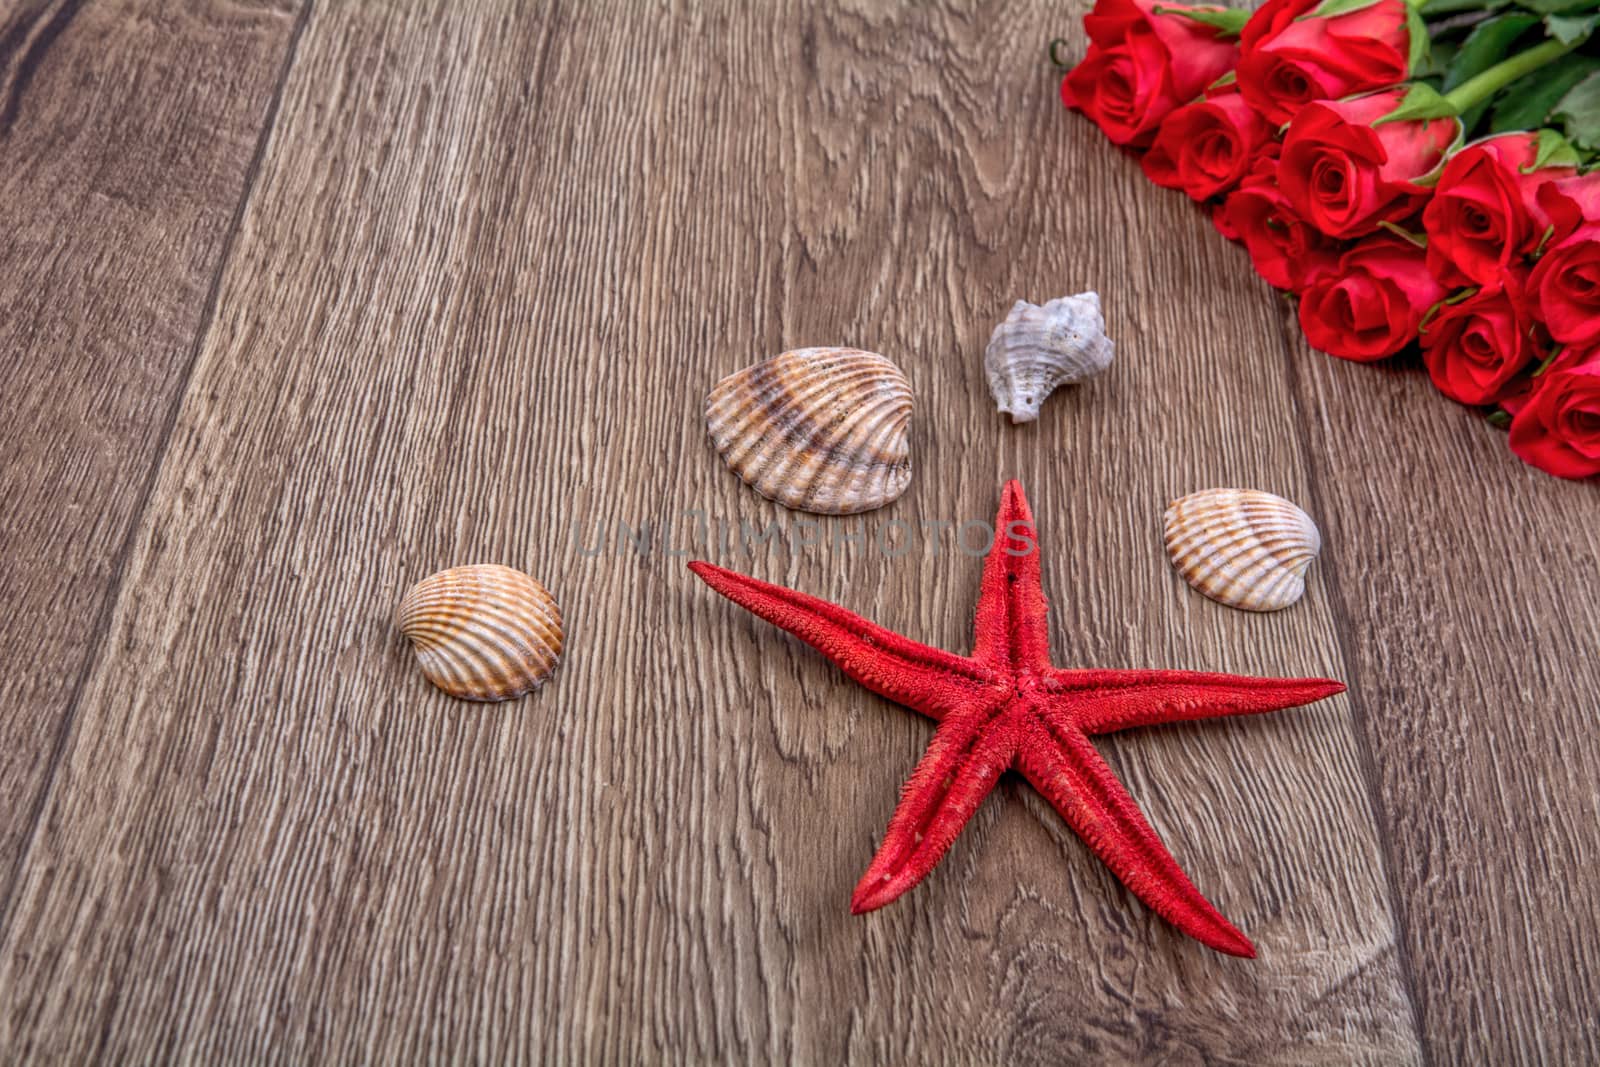 Red starfish and sea shells with roses on a wooden background by neryx